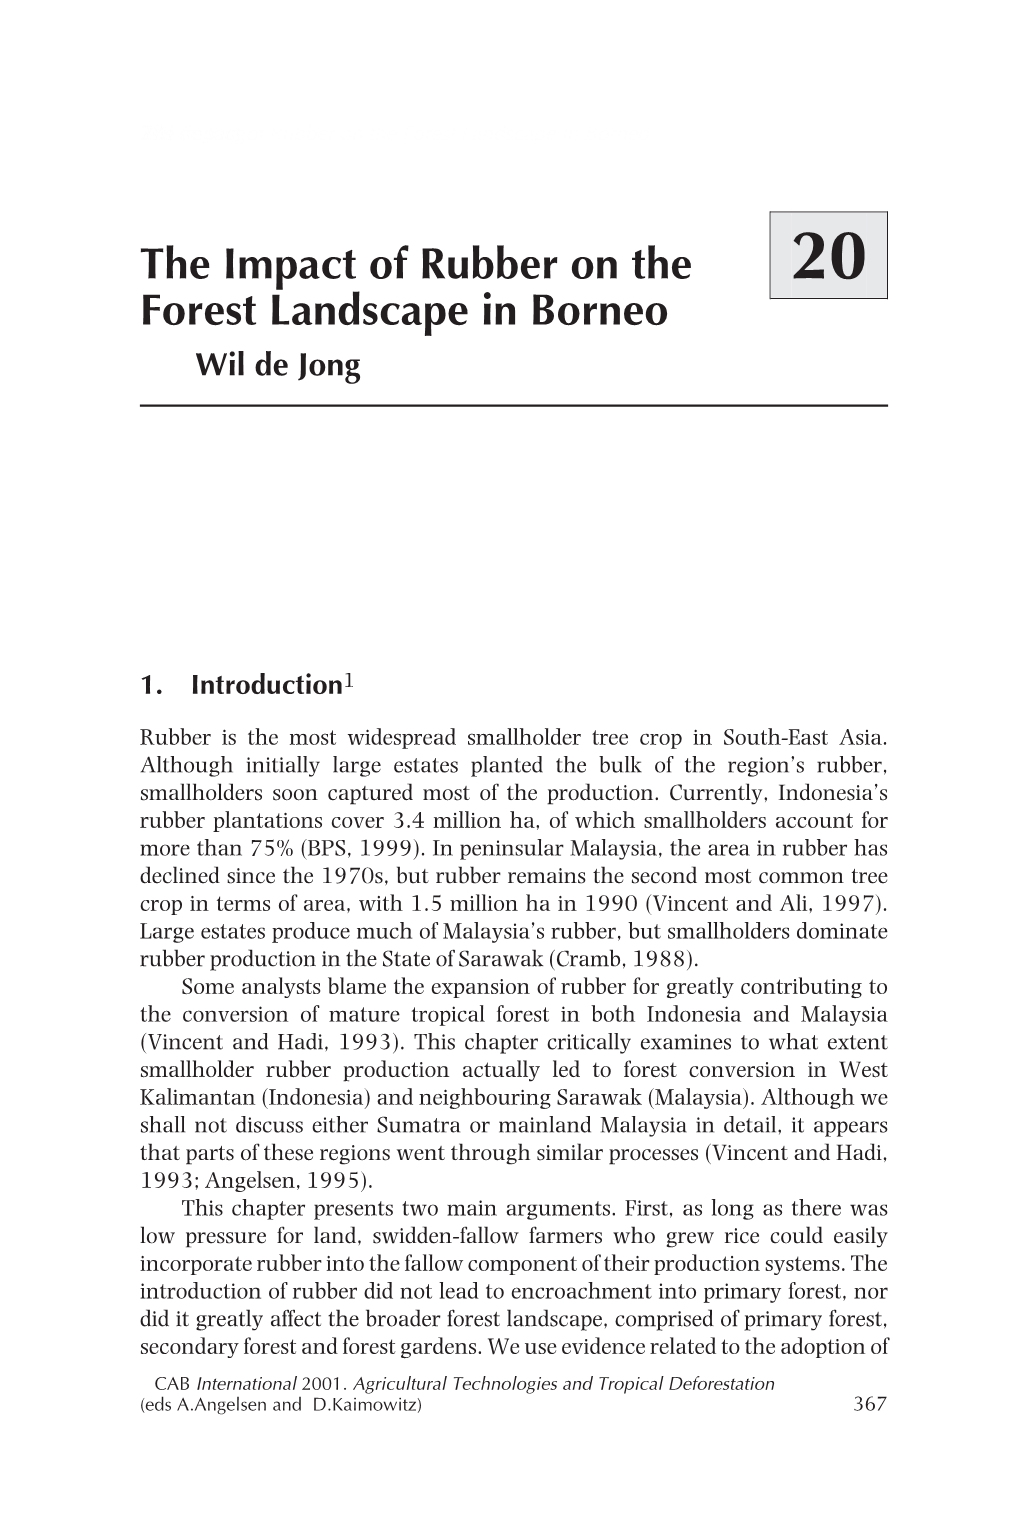 The Impact of Rubber on the Forest Landscape in Borneo 369